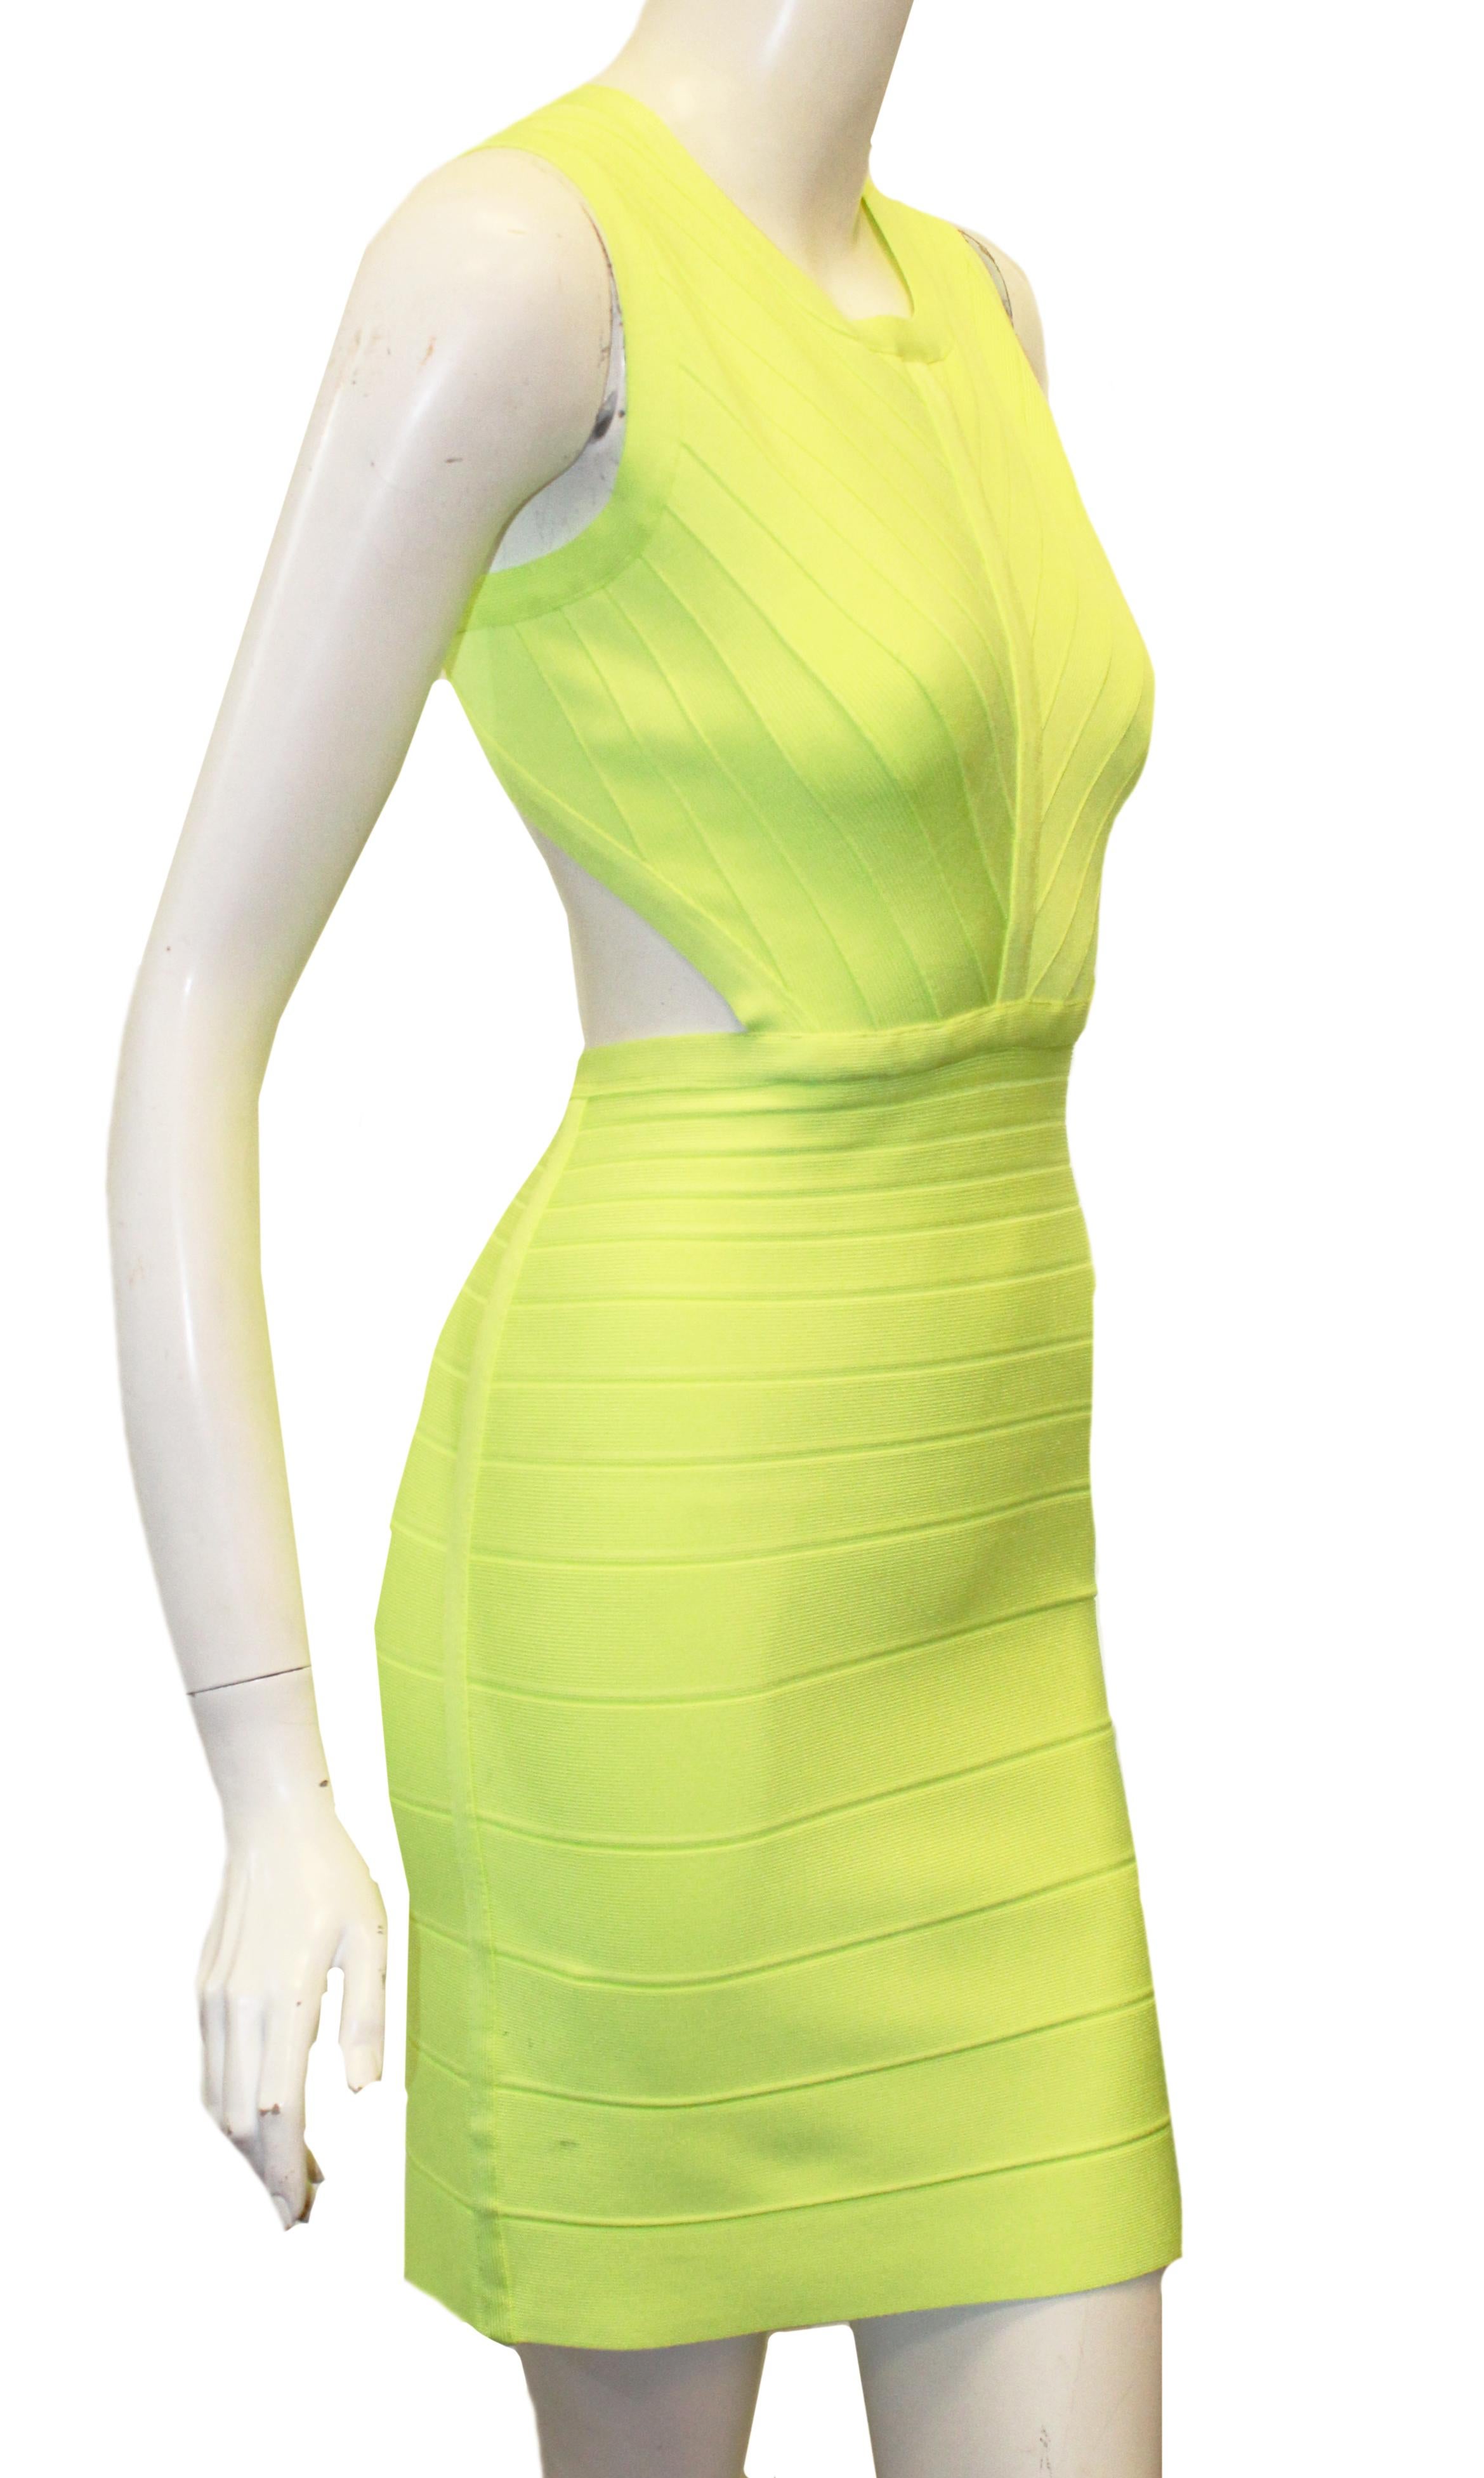 Herve Leger neon green bandage dress contains cut out from the back to the front and from the neck to the waist.  This mini stretchy fabric dress has open back only fasten at the back by hook at neckline.  The dress has, for closure, a small zipper